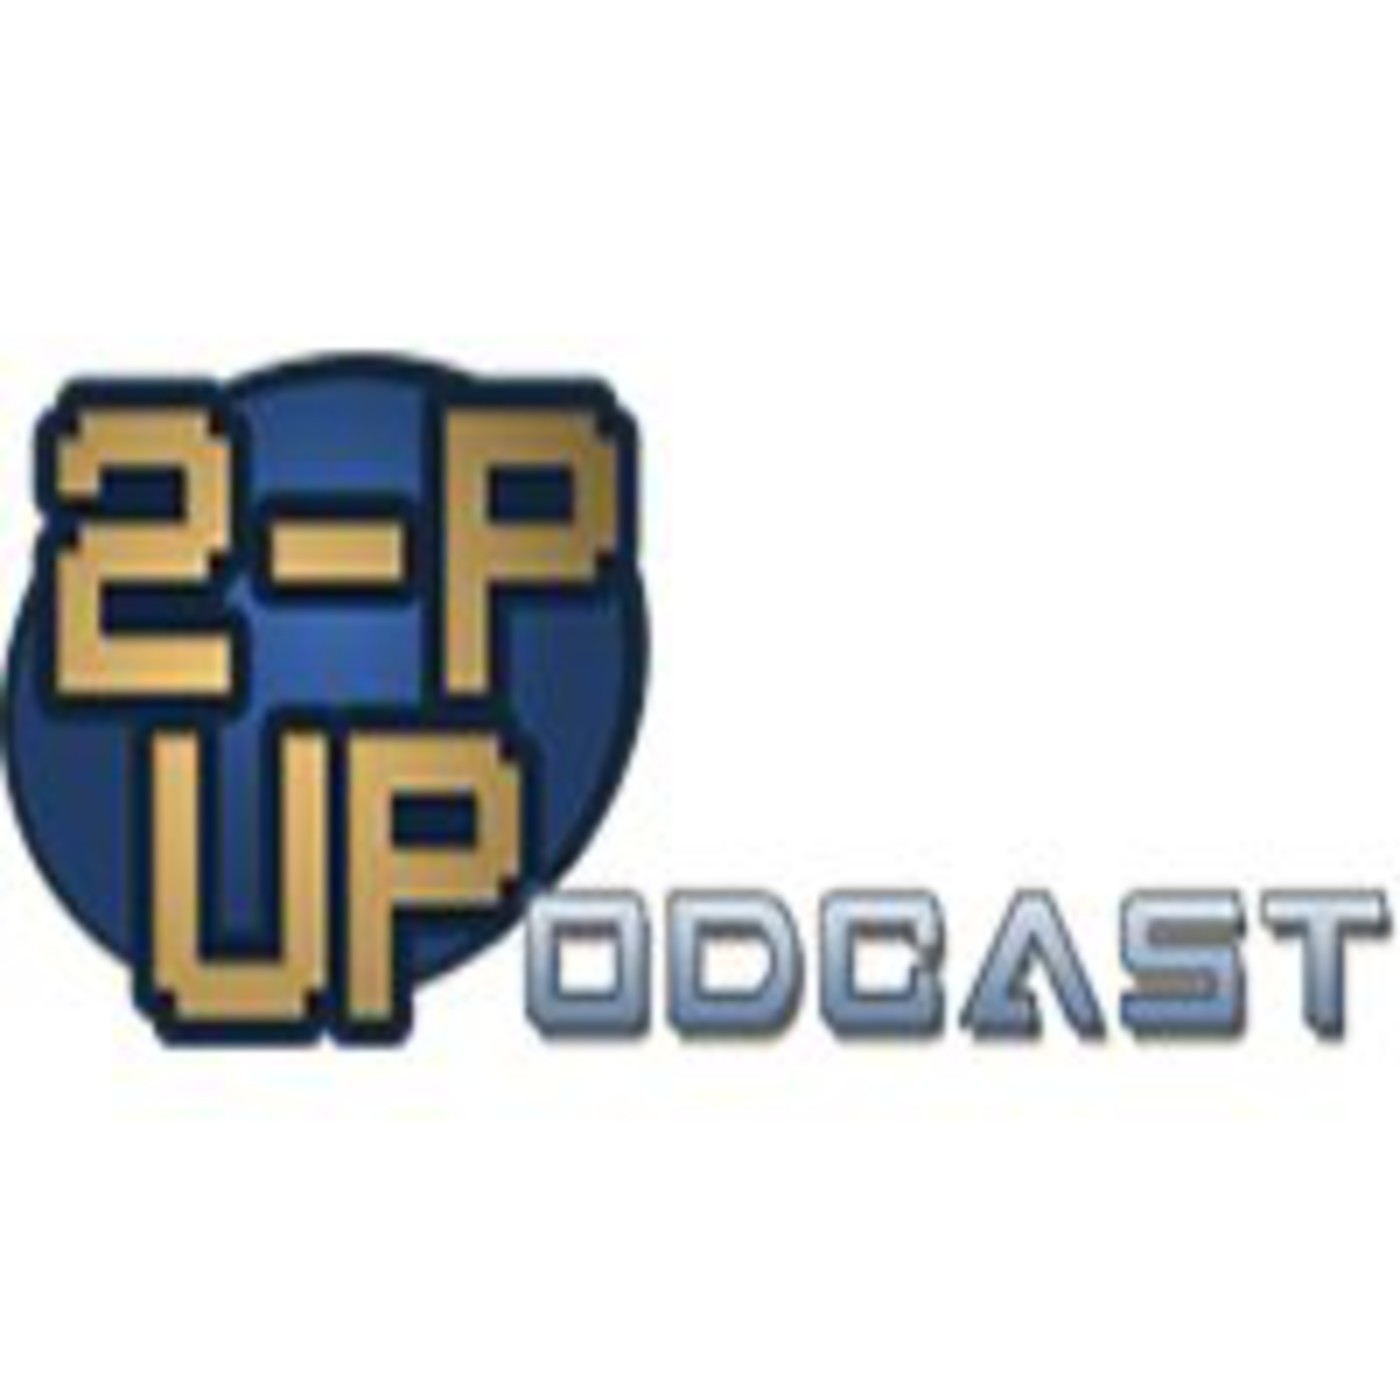 2P-UPodcast